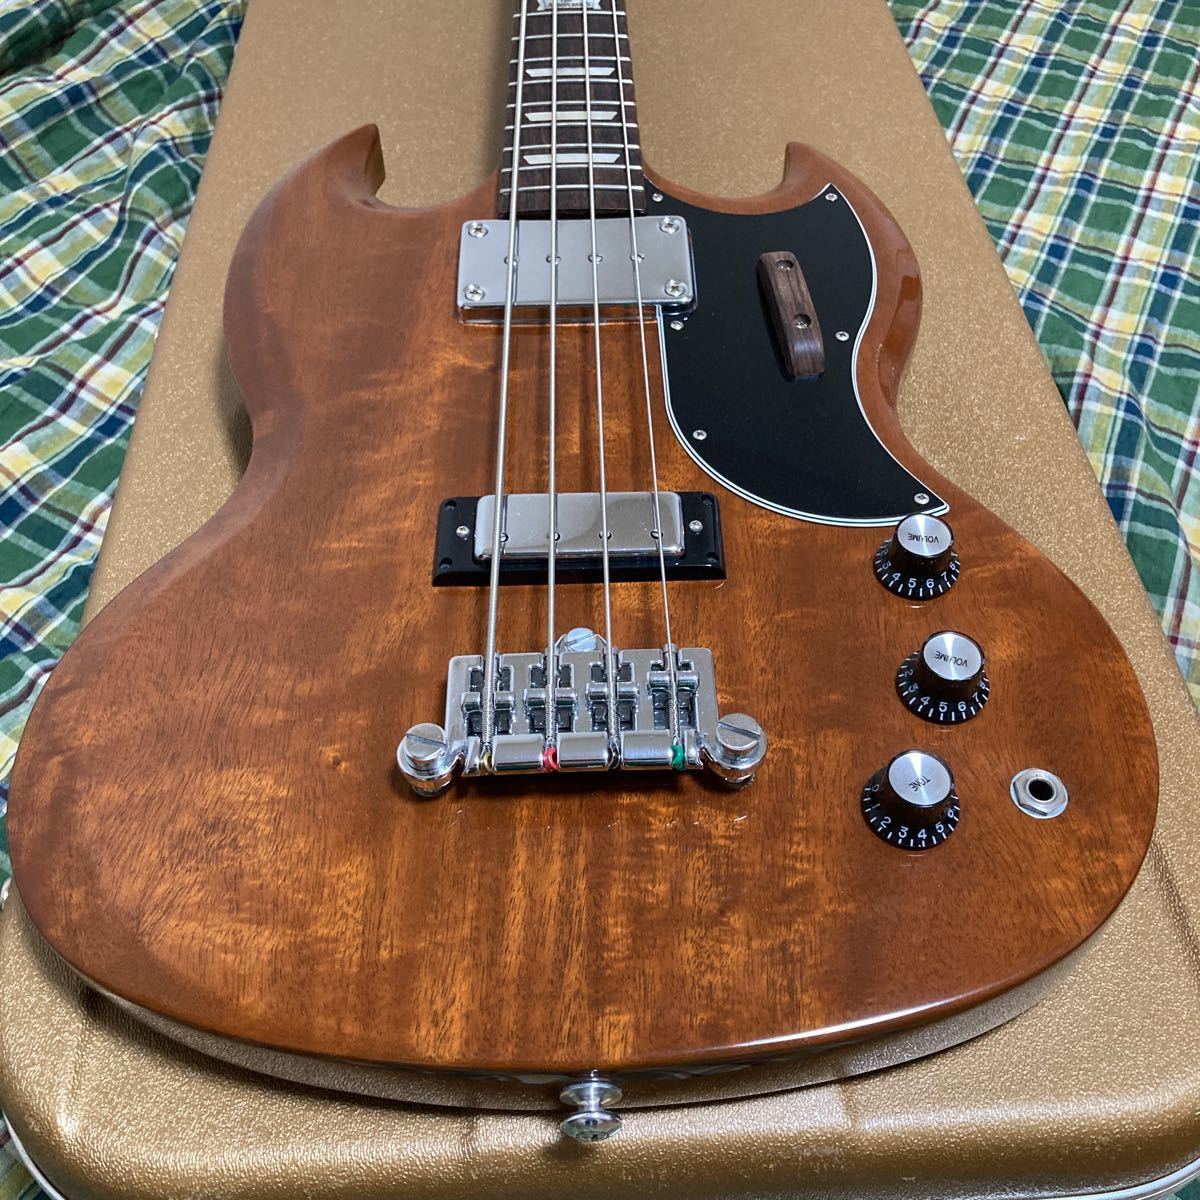 Gibson】SG SPECIAL BASS 120周年記念モデル の商品詳細 | ヤフオク